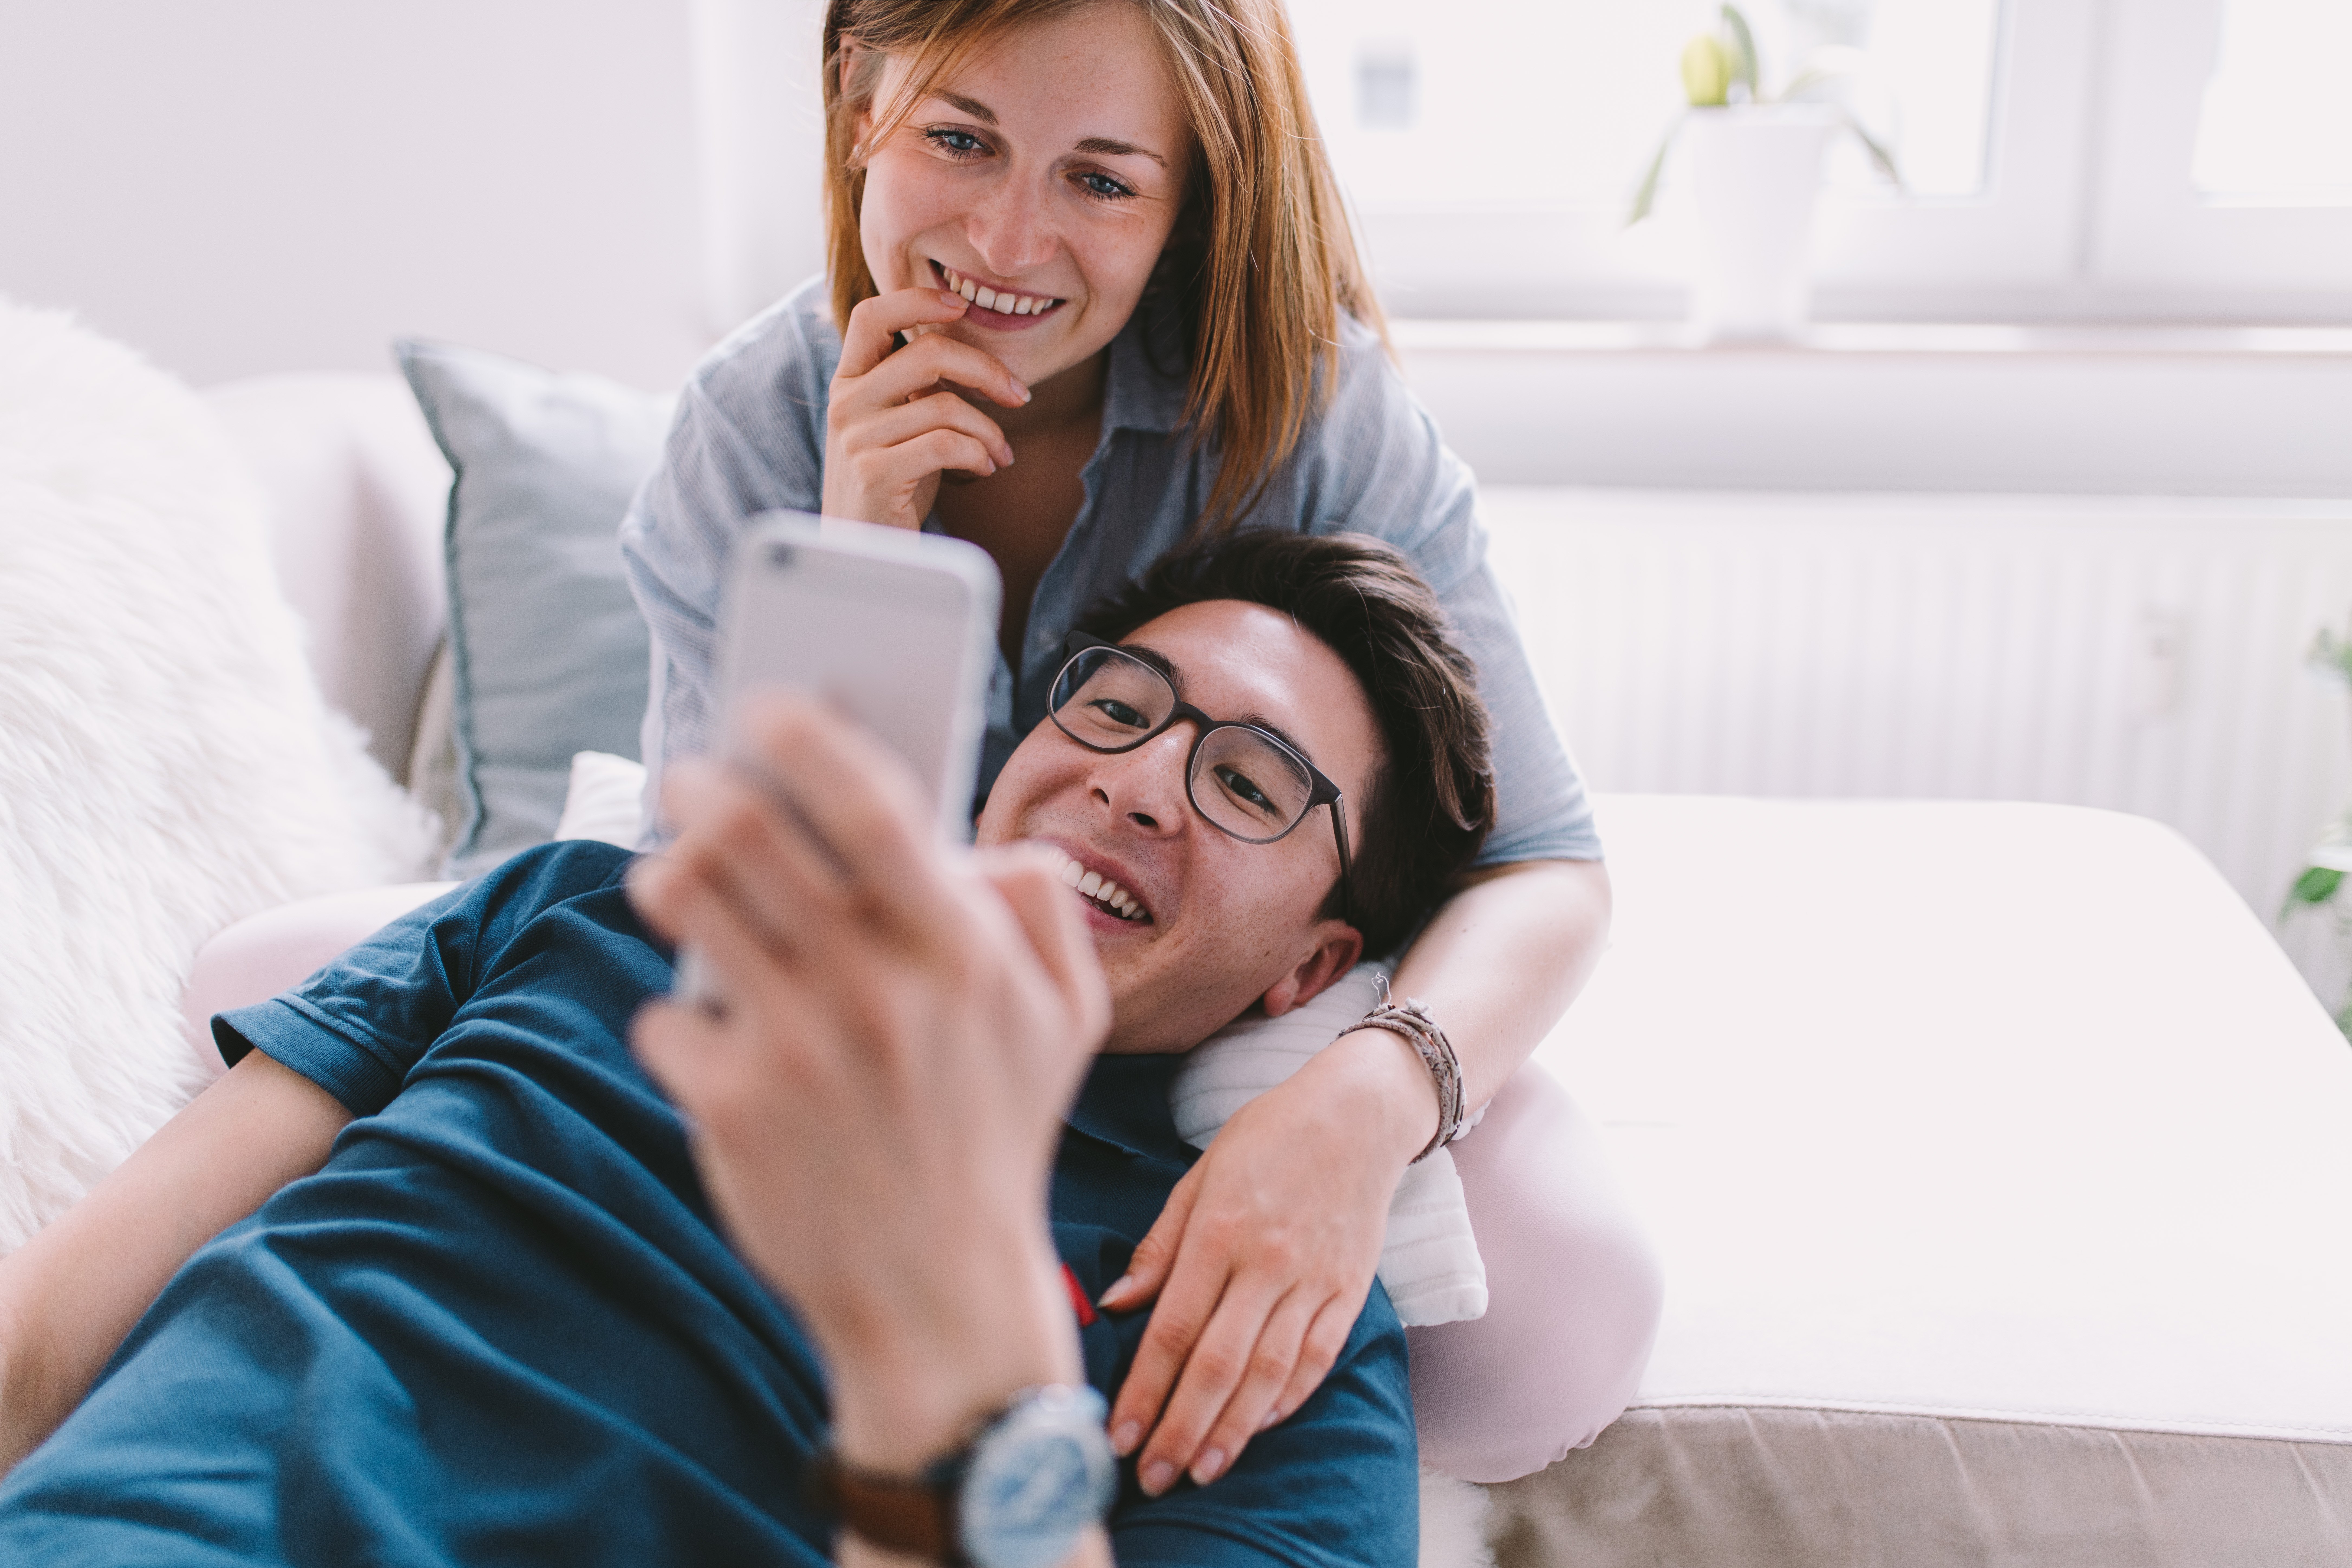 couple-sofa-home-chill-couch-relationship-internet-smartphone-social-media-browsing_t20_e8xZYv-1